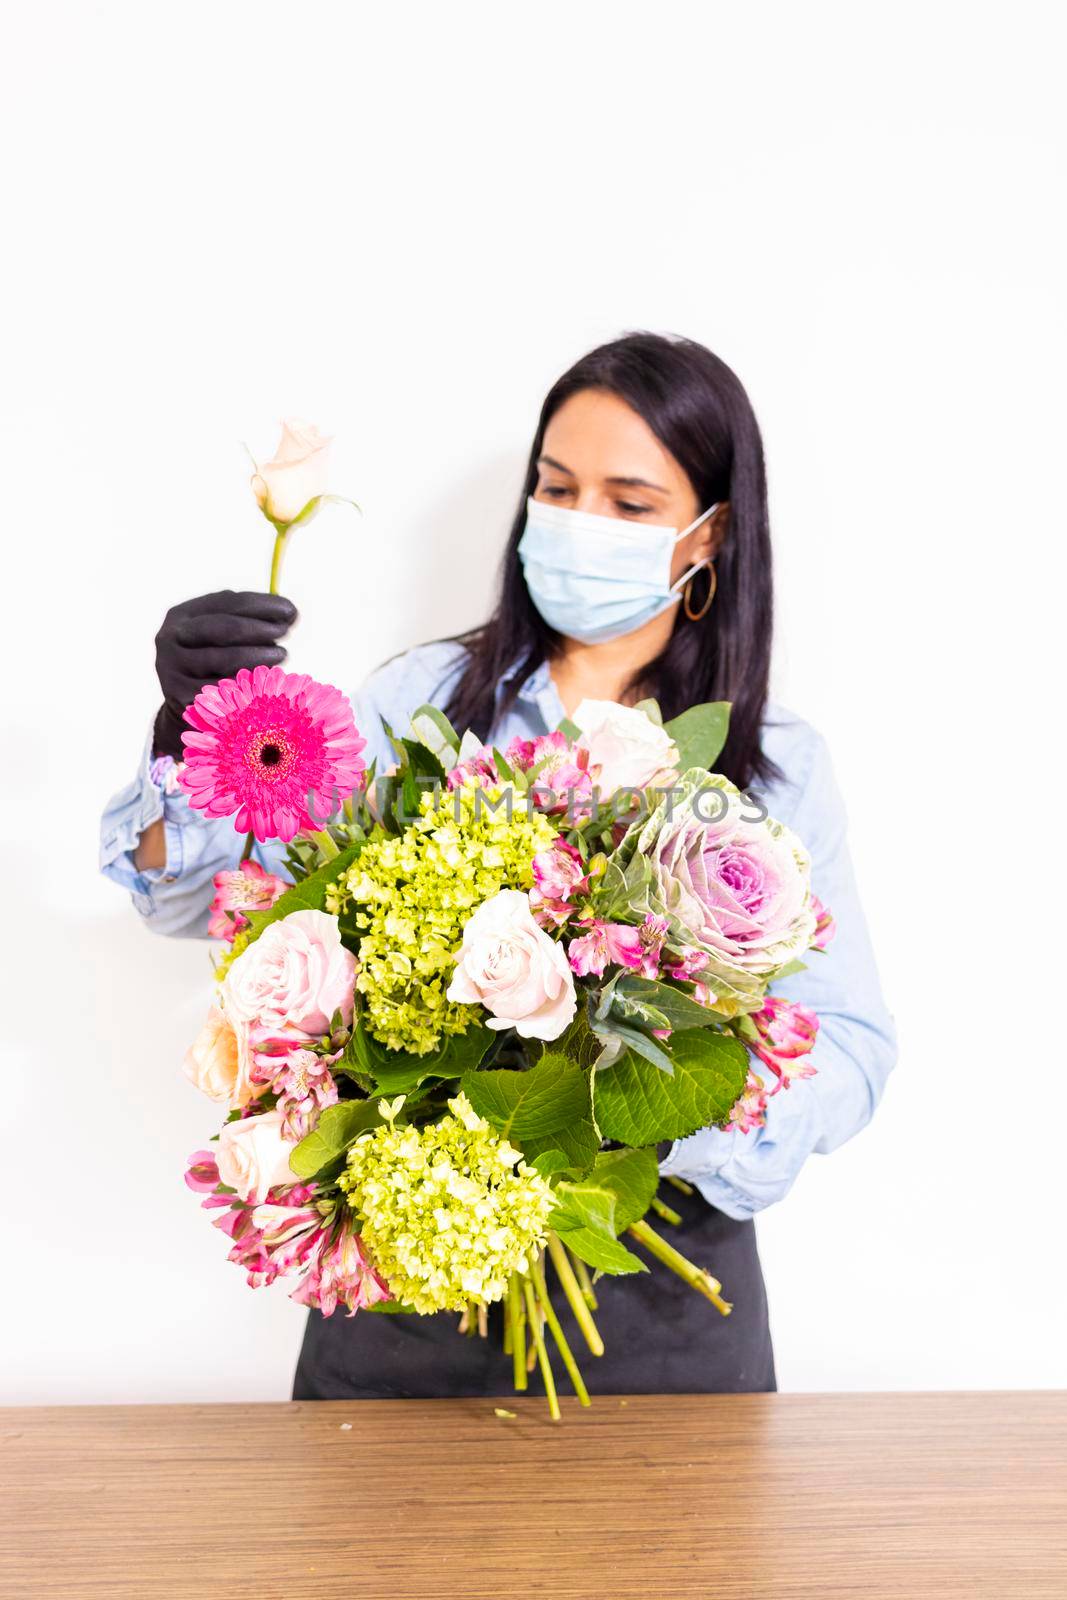 Cute woman florist is making a bouquet of roses, hydrangeas and alstroemerias by eagg13